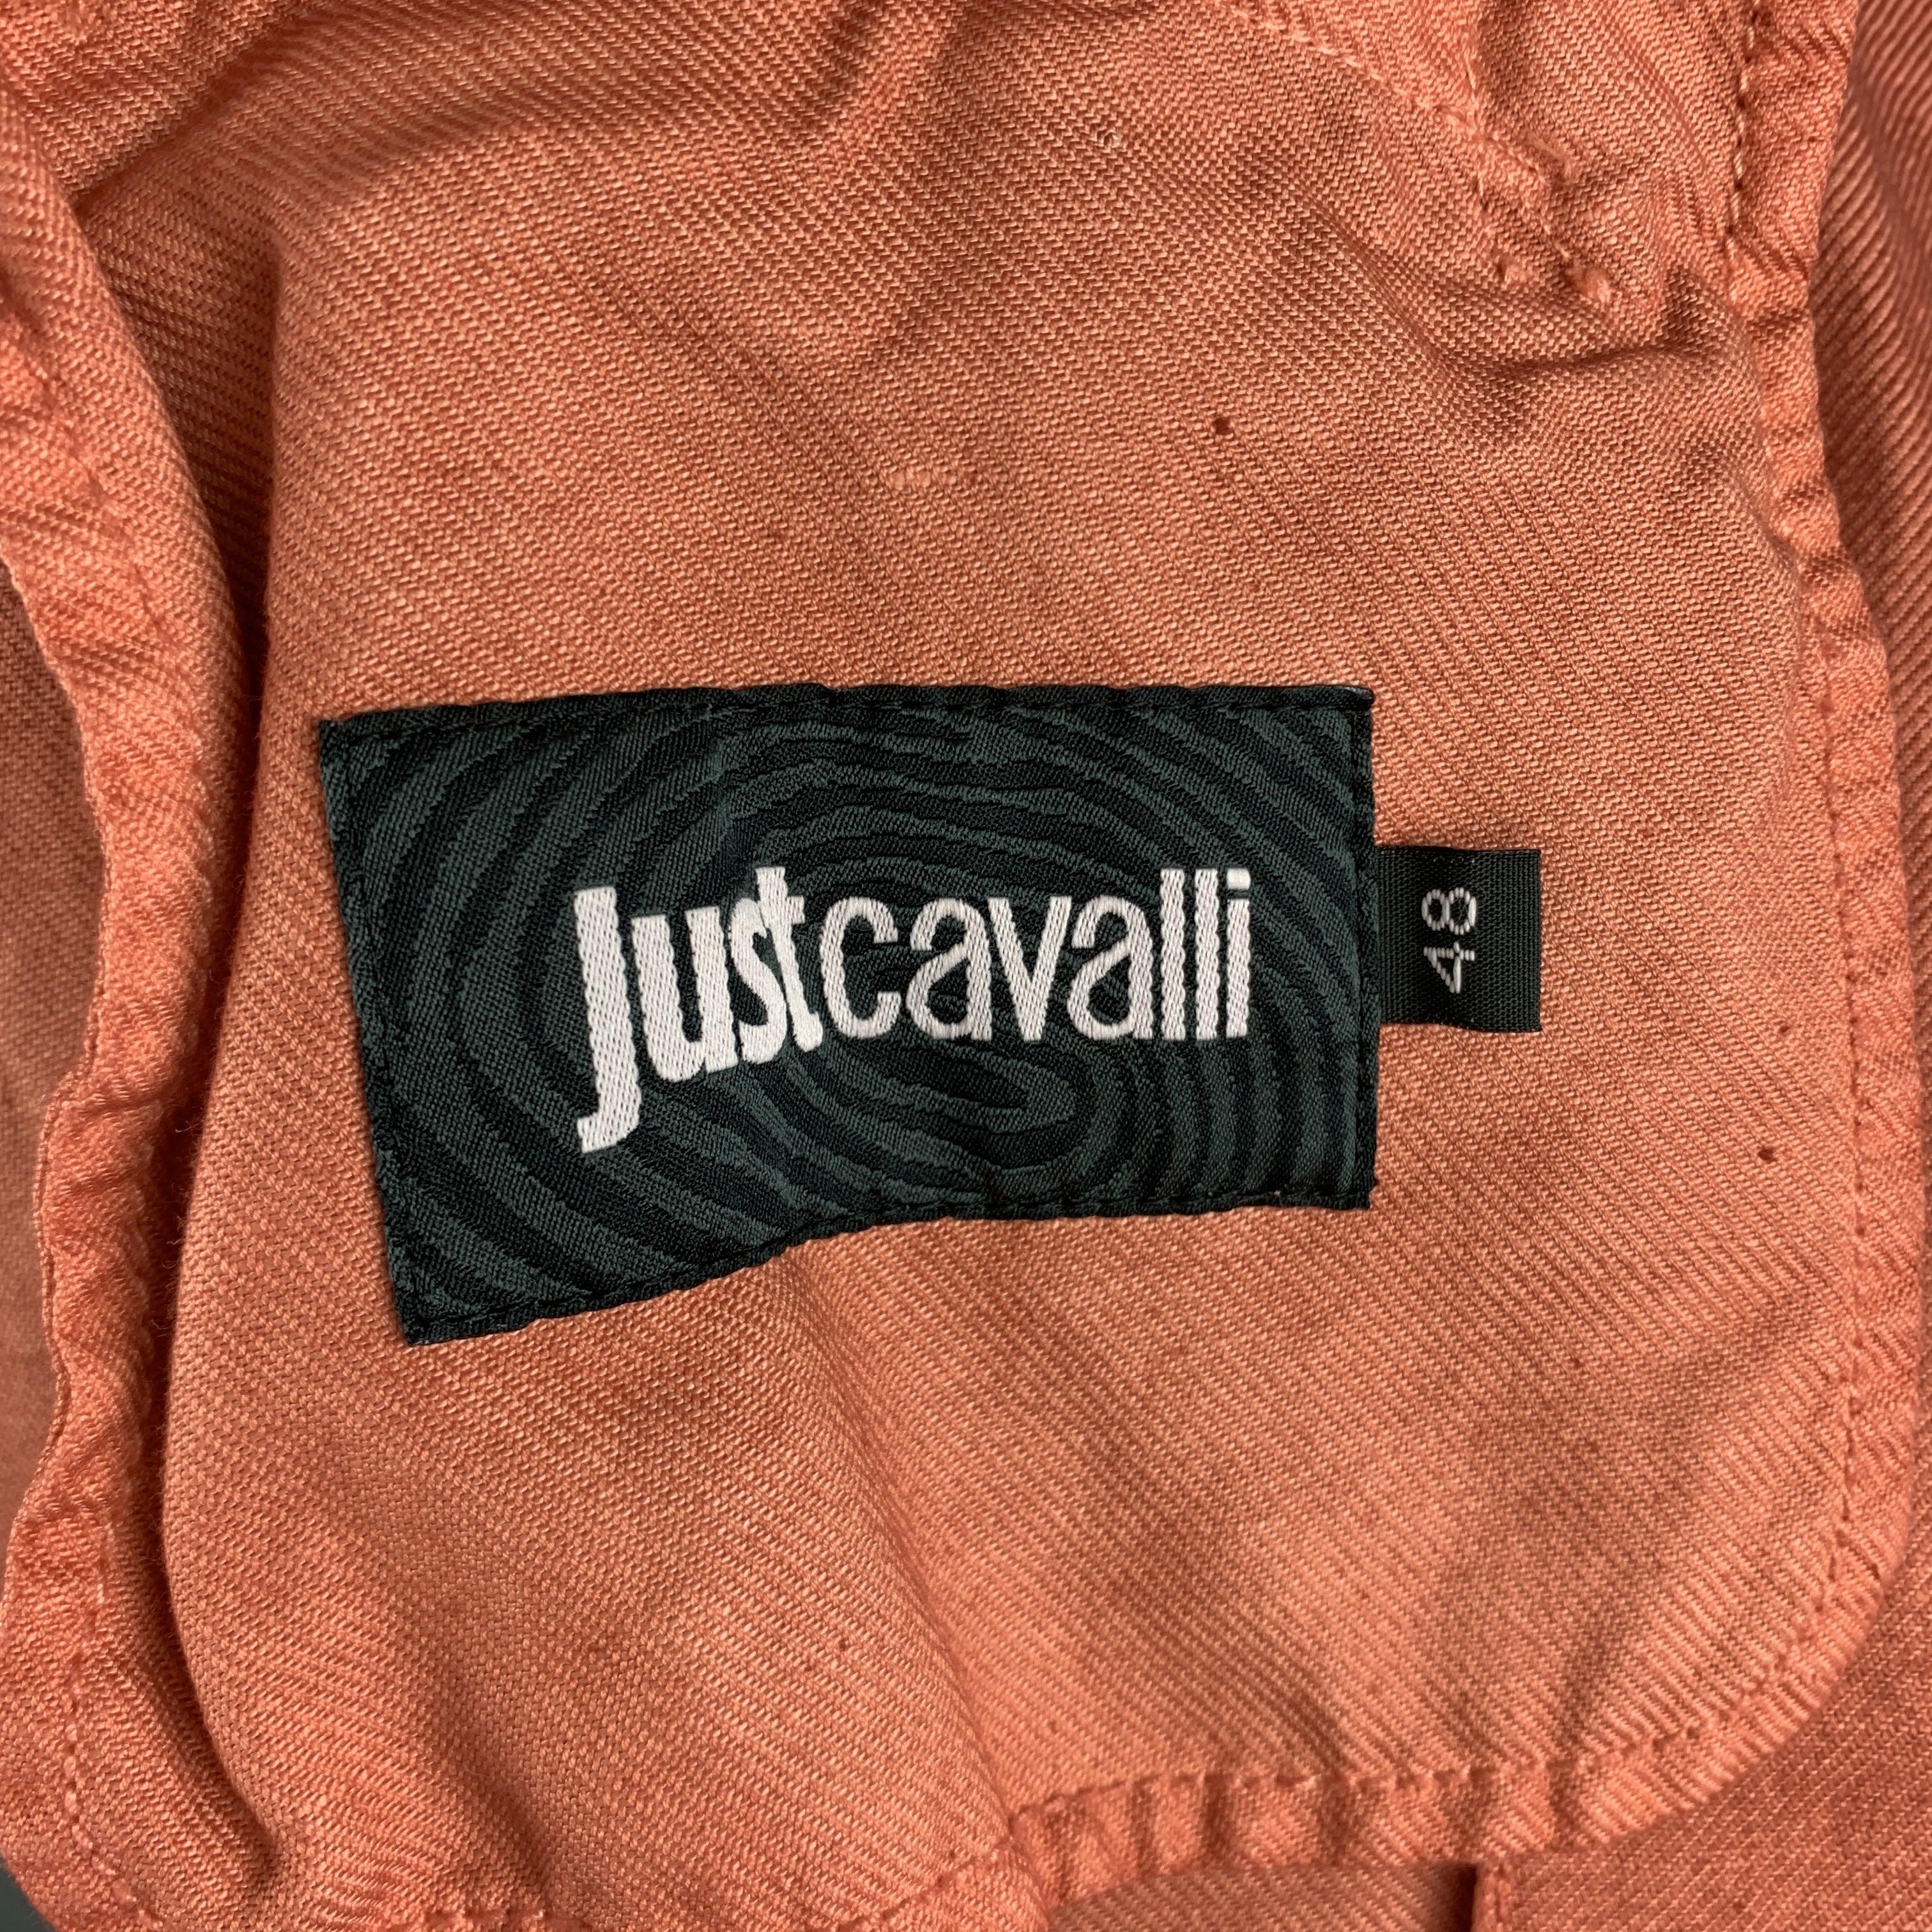 JUST CAVALLI Washed Brick Red Cotton / Linen Notch Lapel Sport Coat For Sale 6